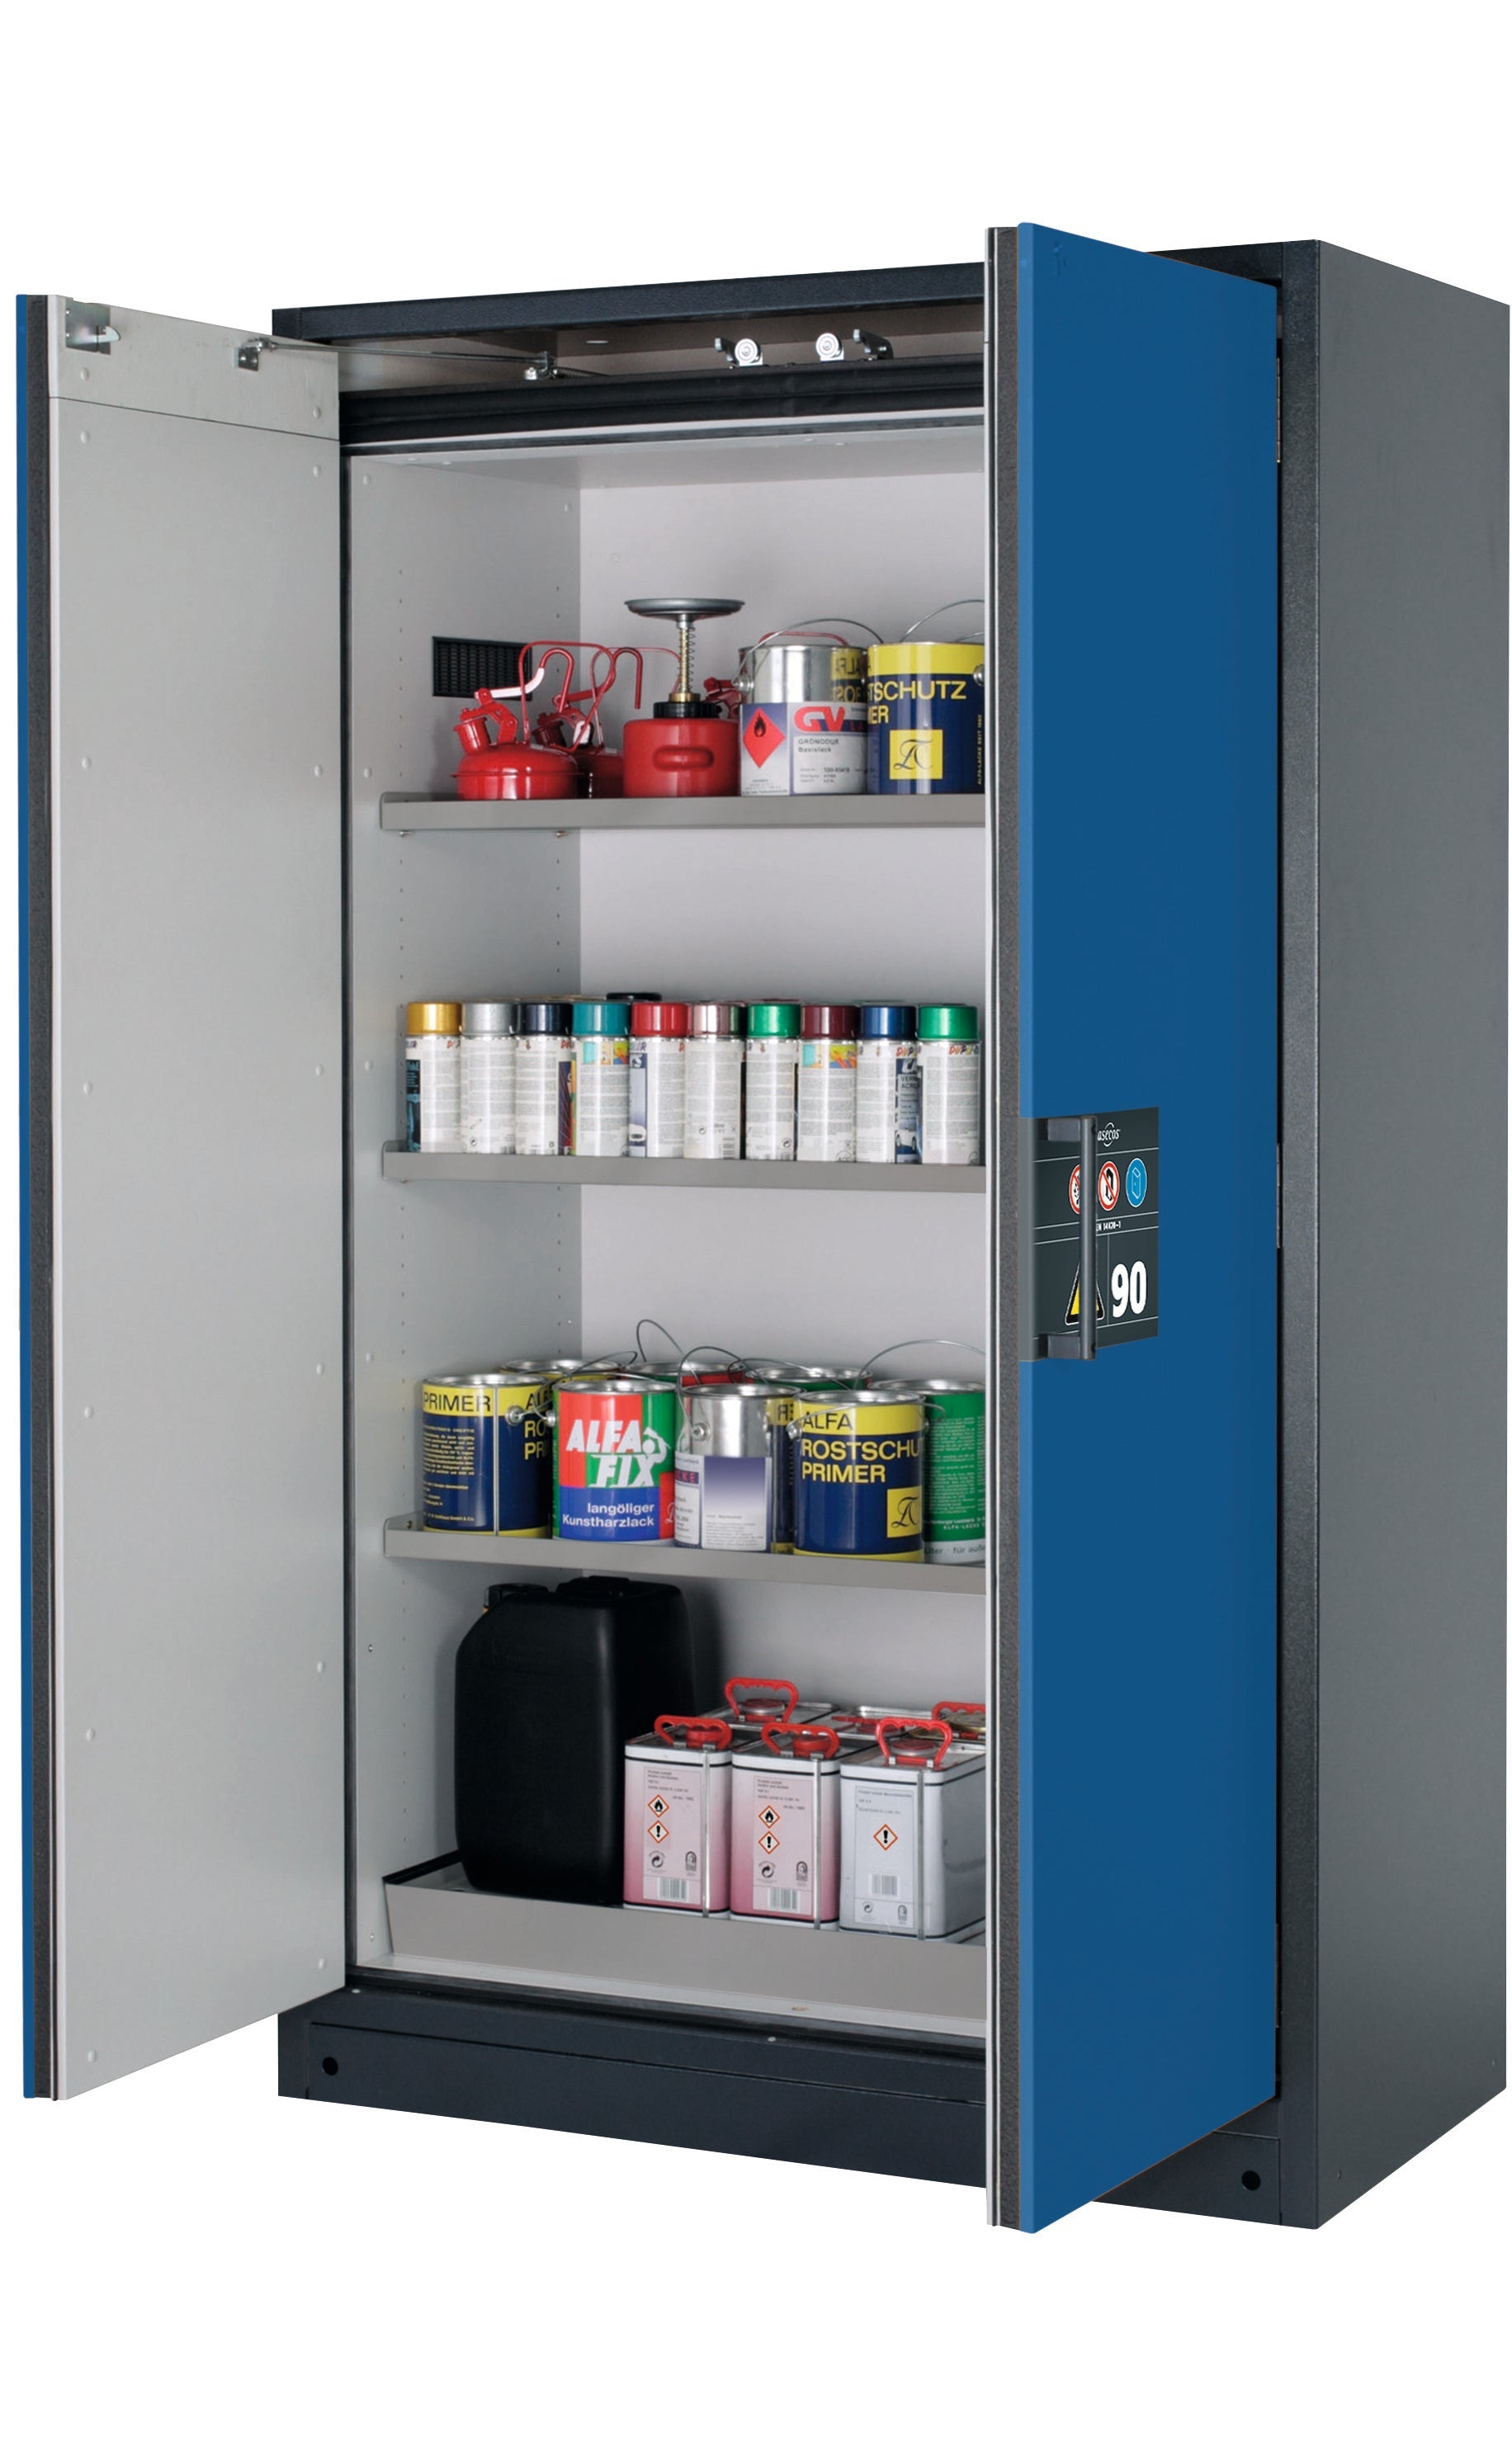 Type 90 safety storage cabinet Q-CLASSIC-90 model Q90.195.120 in gentian blue RAL 5010 with 3x shelf standard (stainless steel 1.4301),